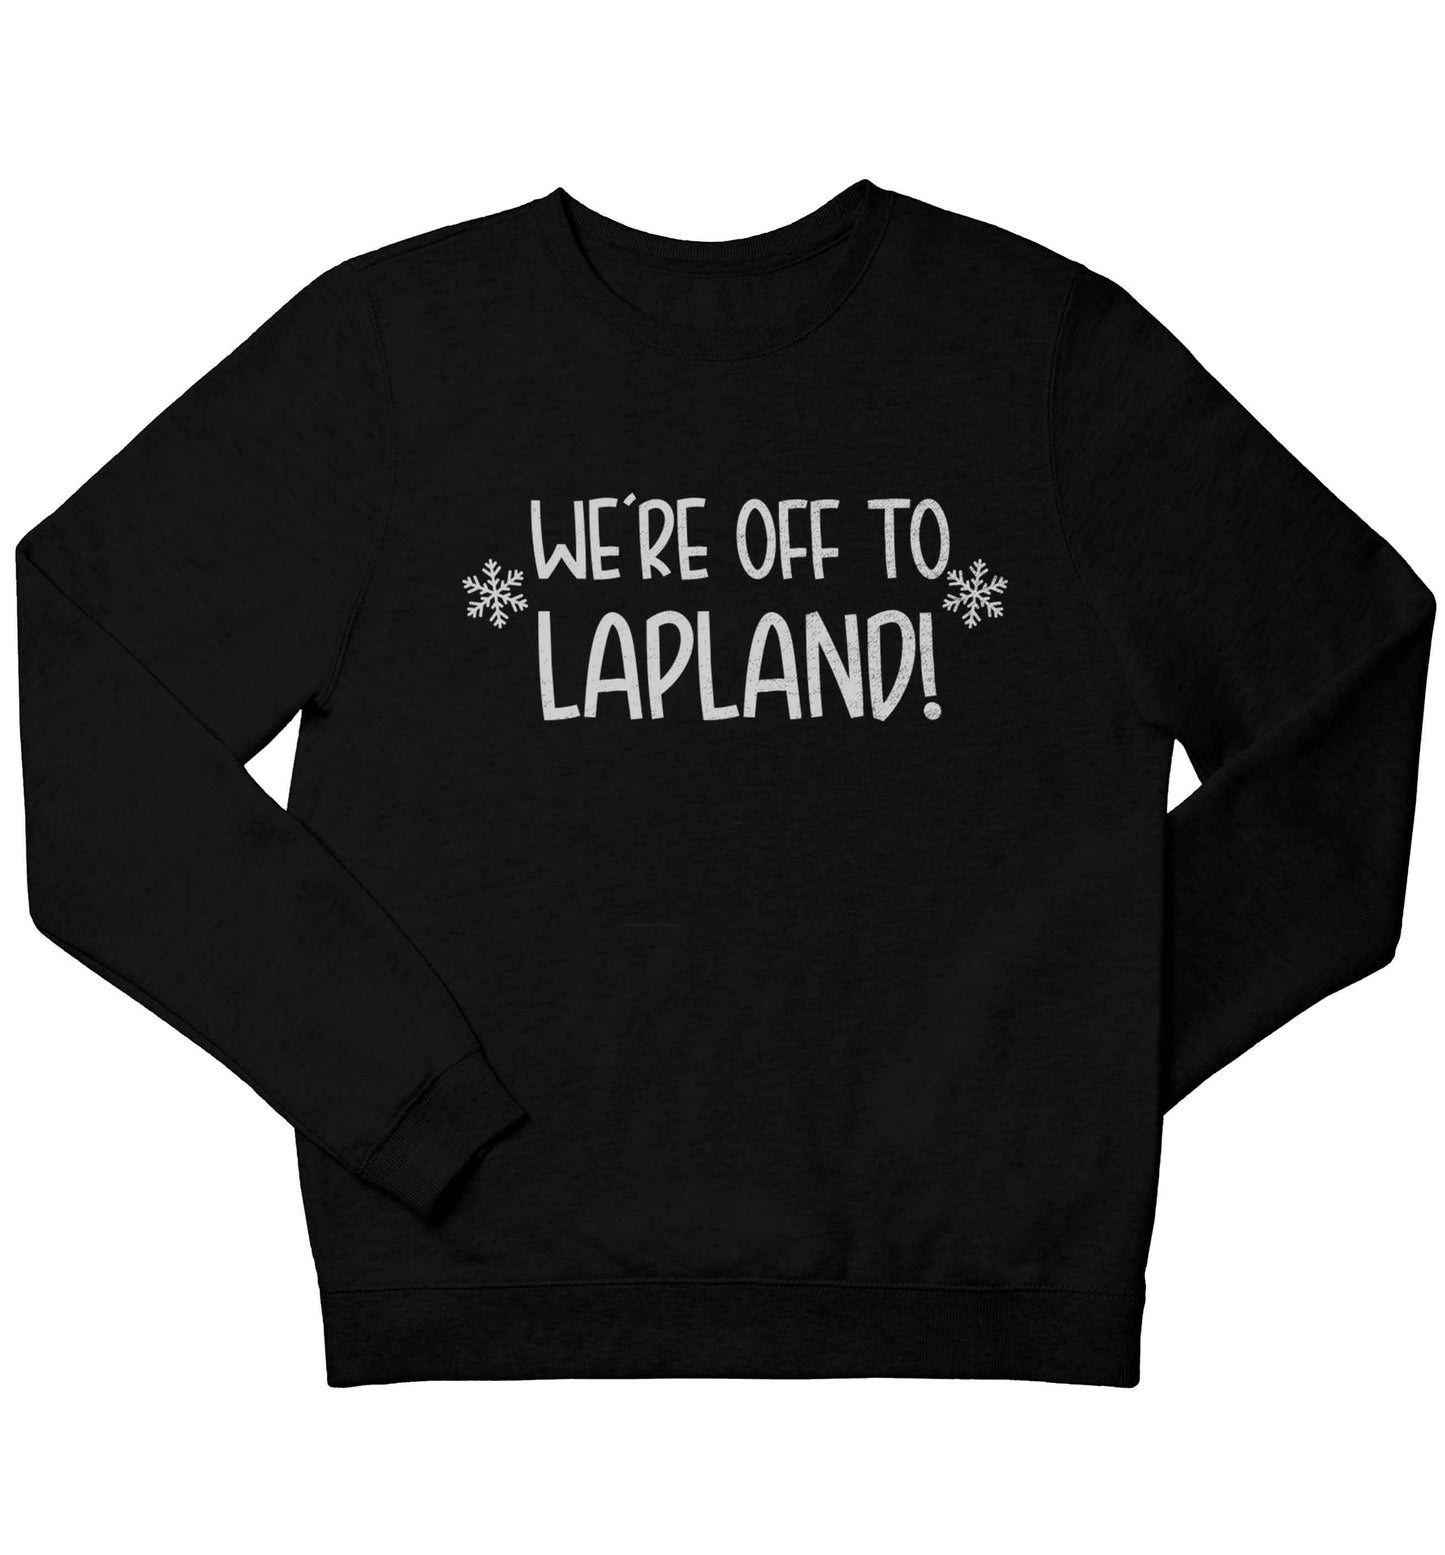 We're off to Lapland children's black sweater 12-13 Years